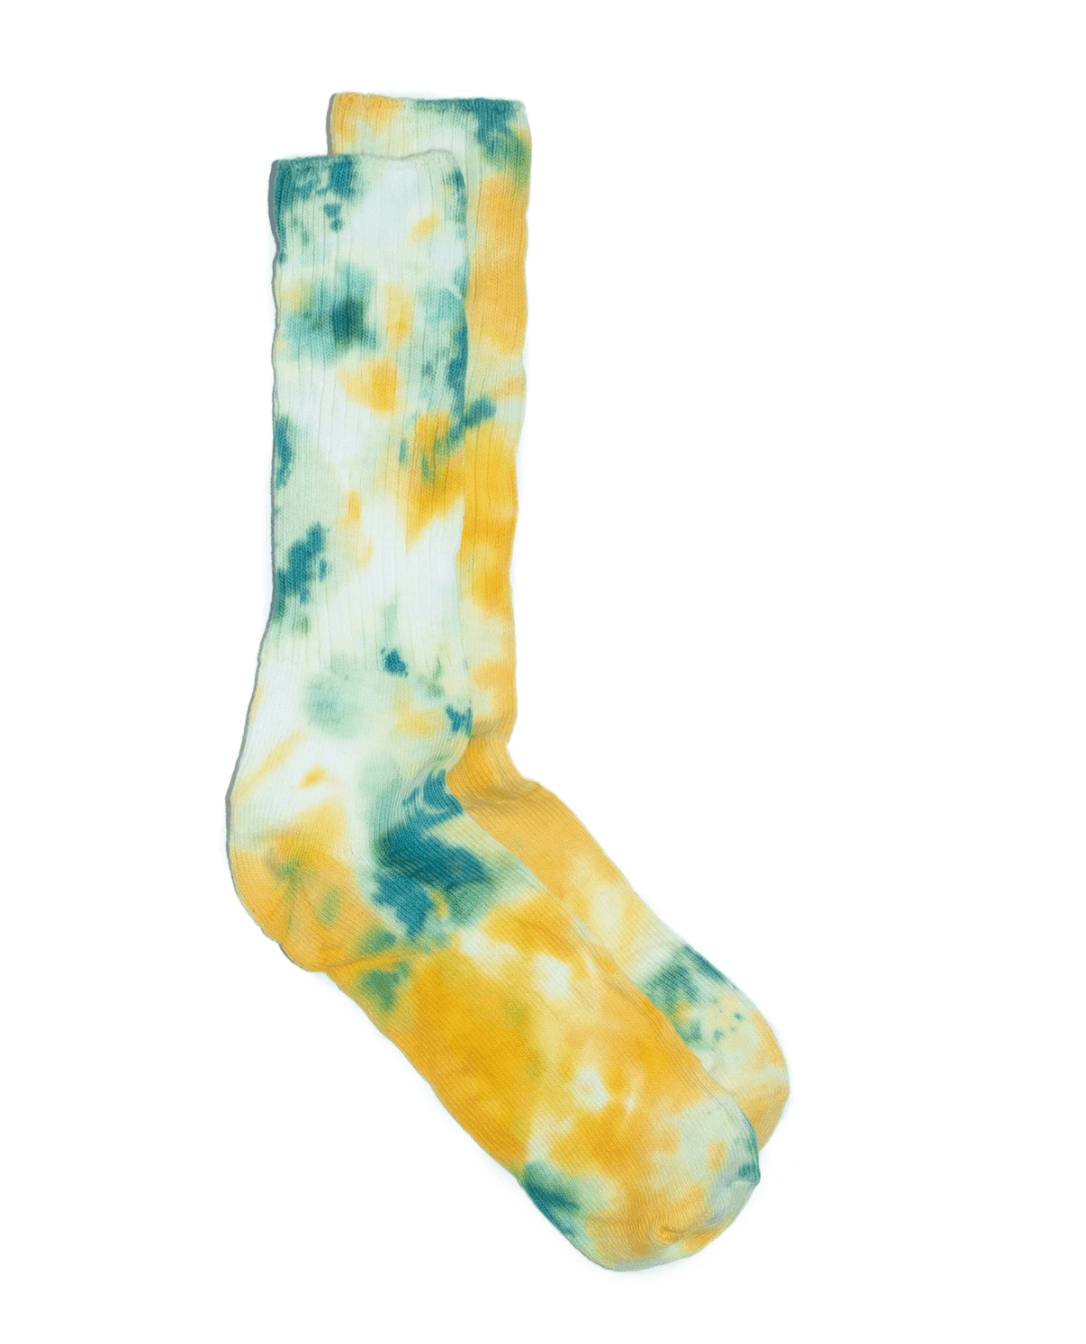 Under $20 Father's Day Pick: The Hand Dyed Project, Cotton Socks